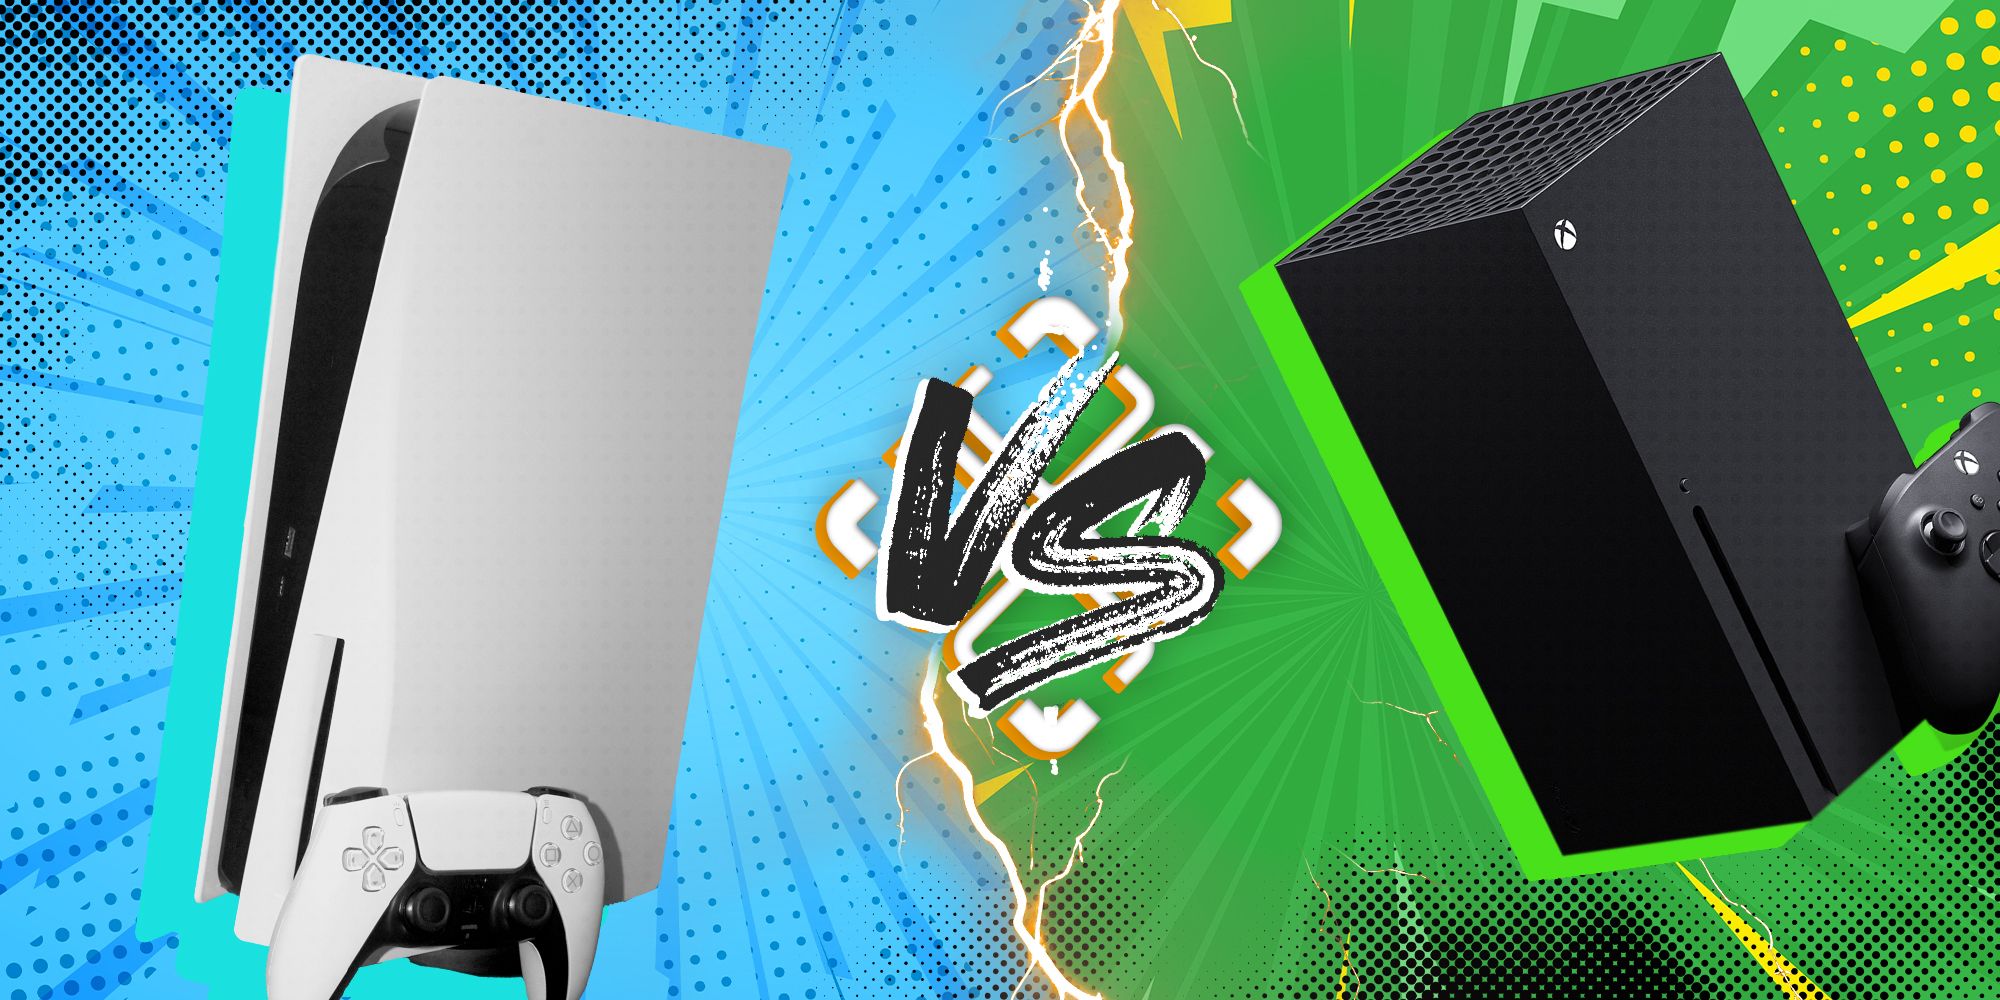 PS5 Vs. Xbox Series X: Which Console Should You Buy?